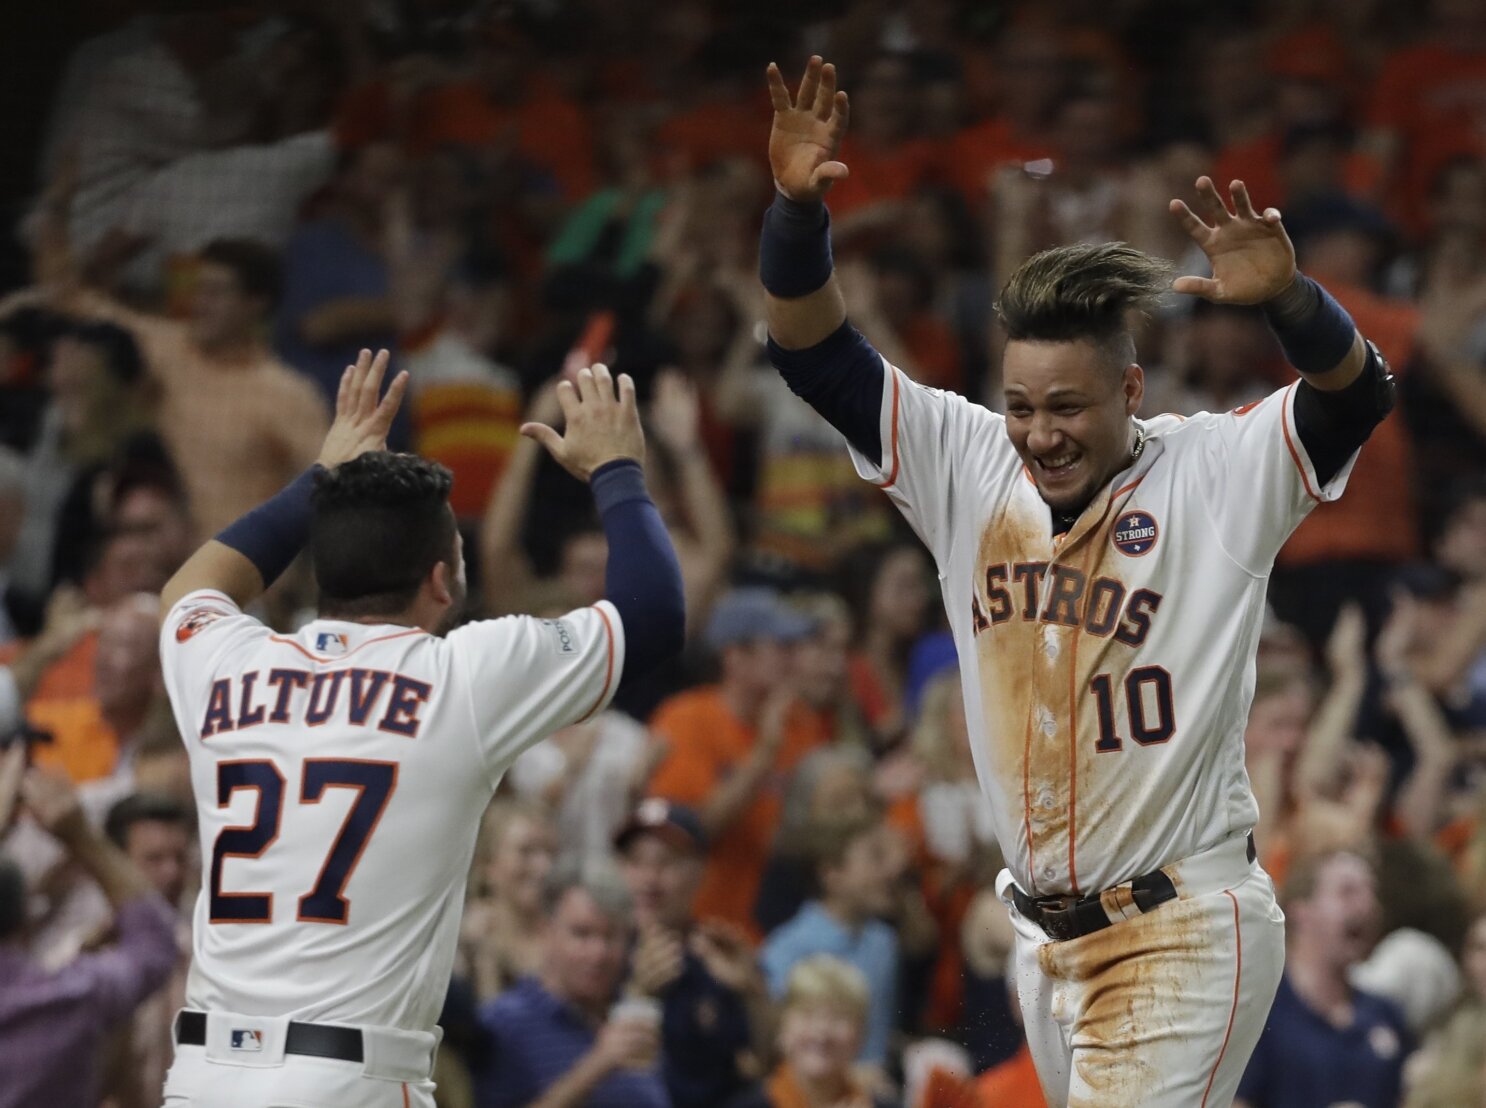 Astros romp past Dodgers for 1st title